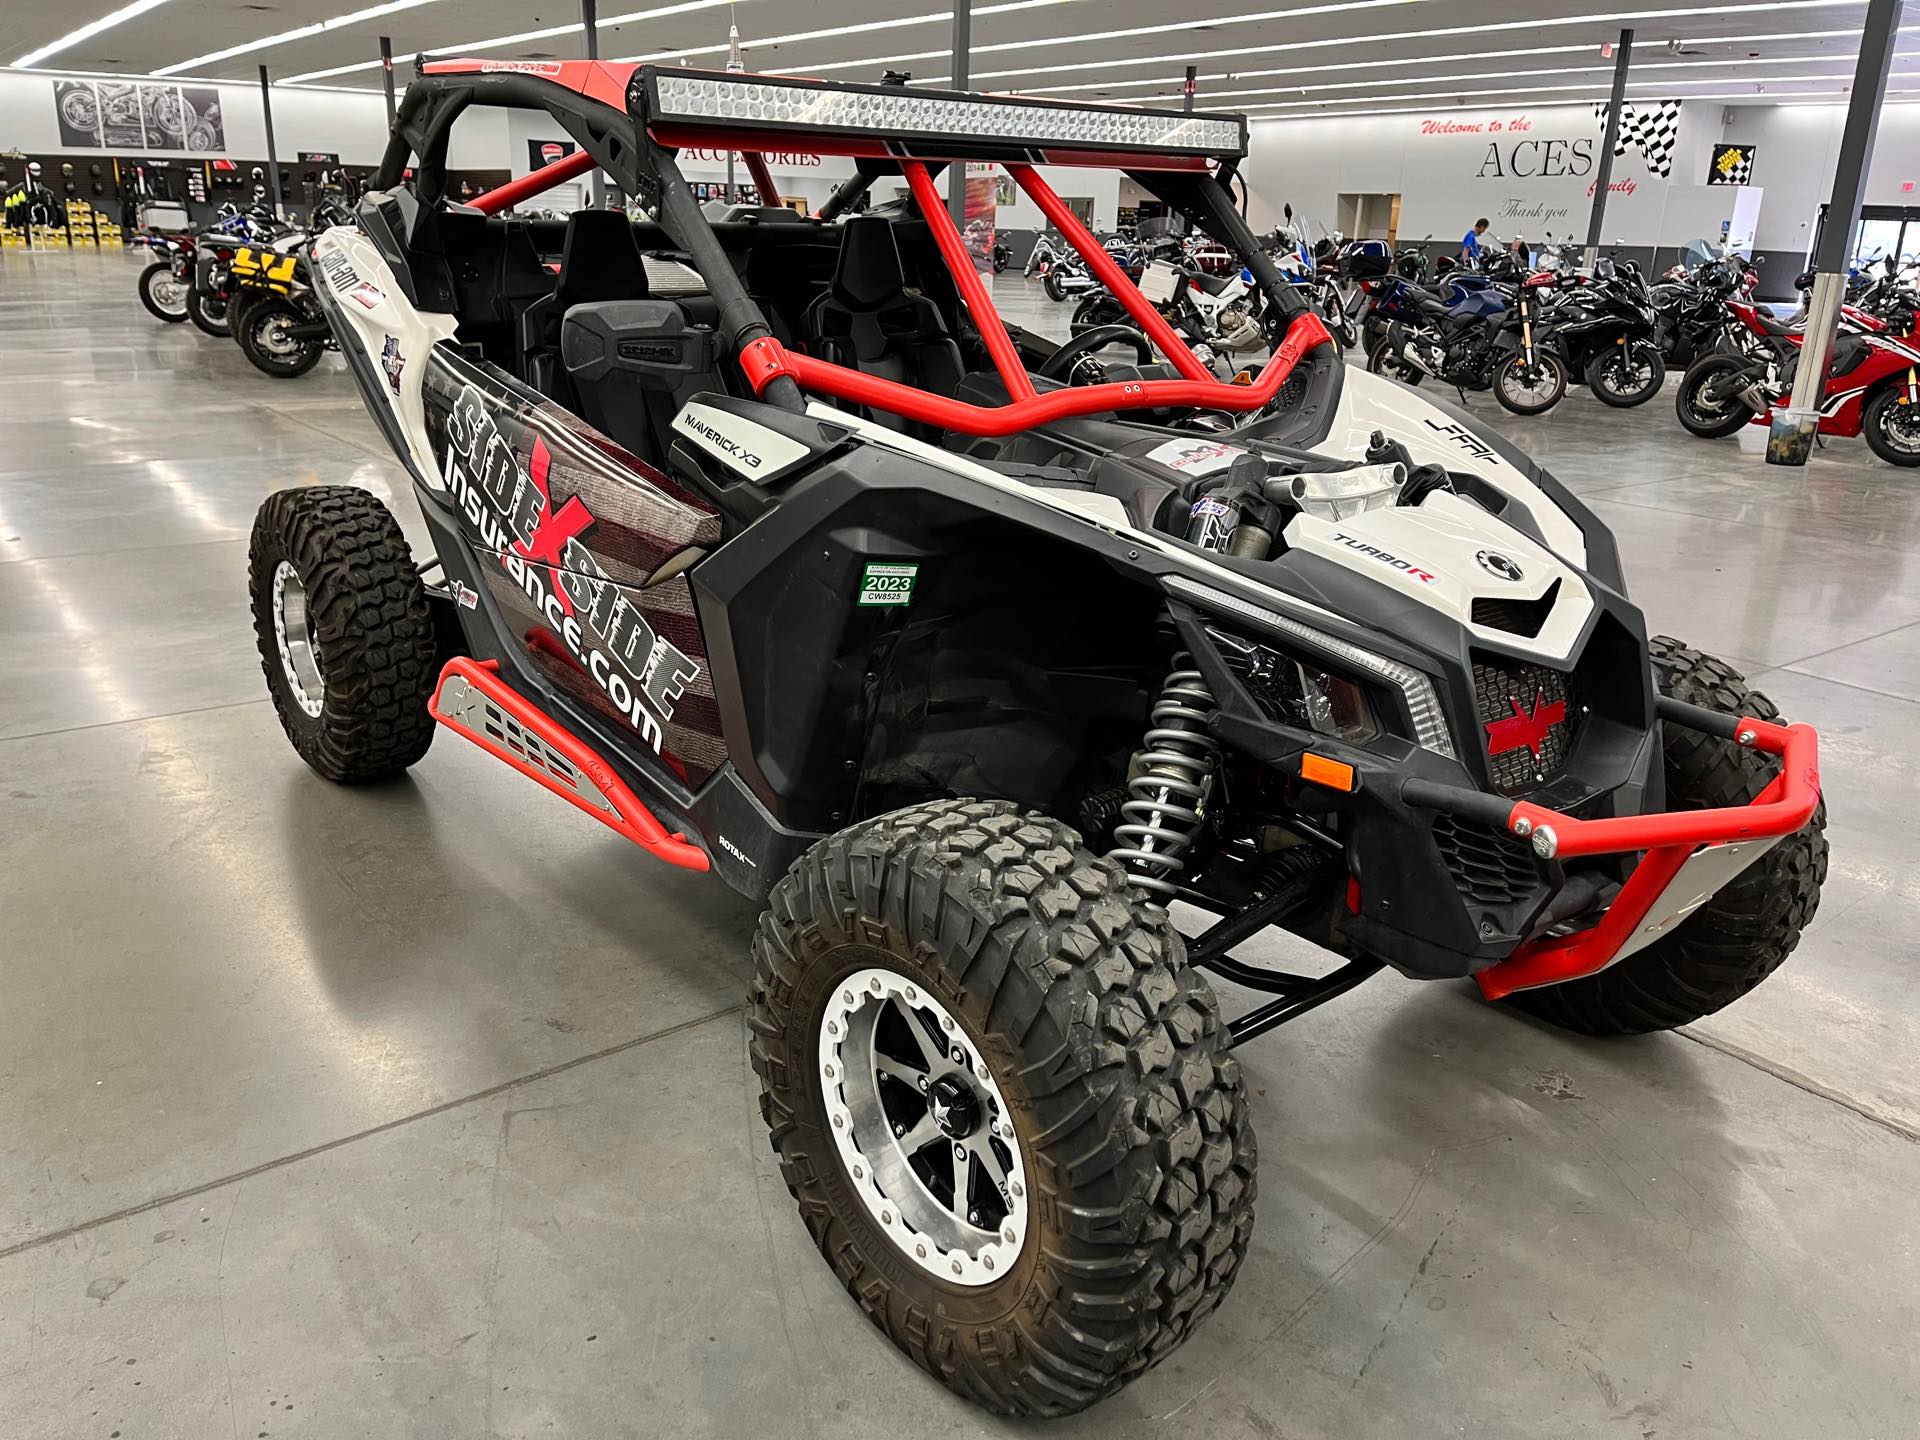 2017 Can-Am Maverick X3 TURBO R at Aces Motorcycles - Denver